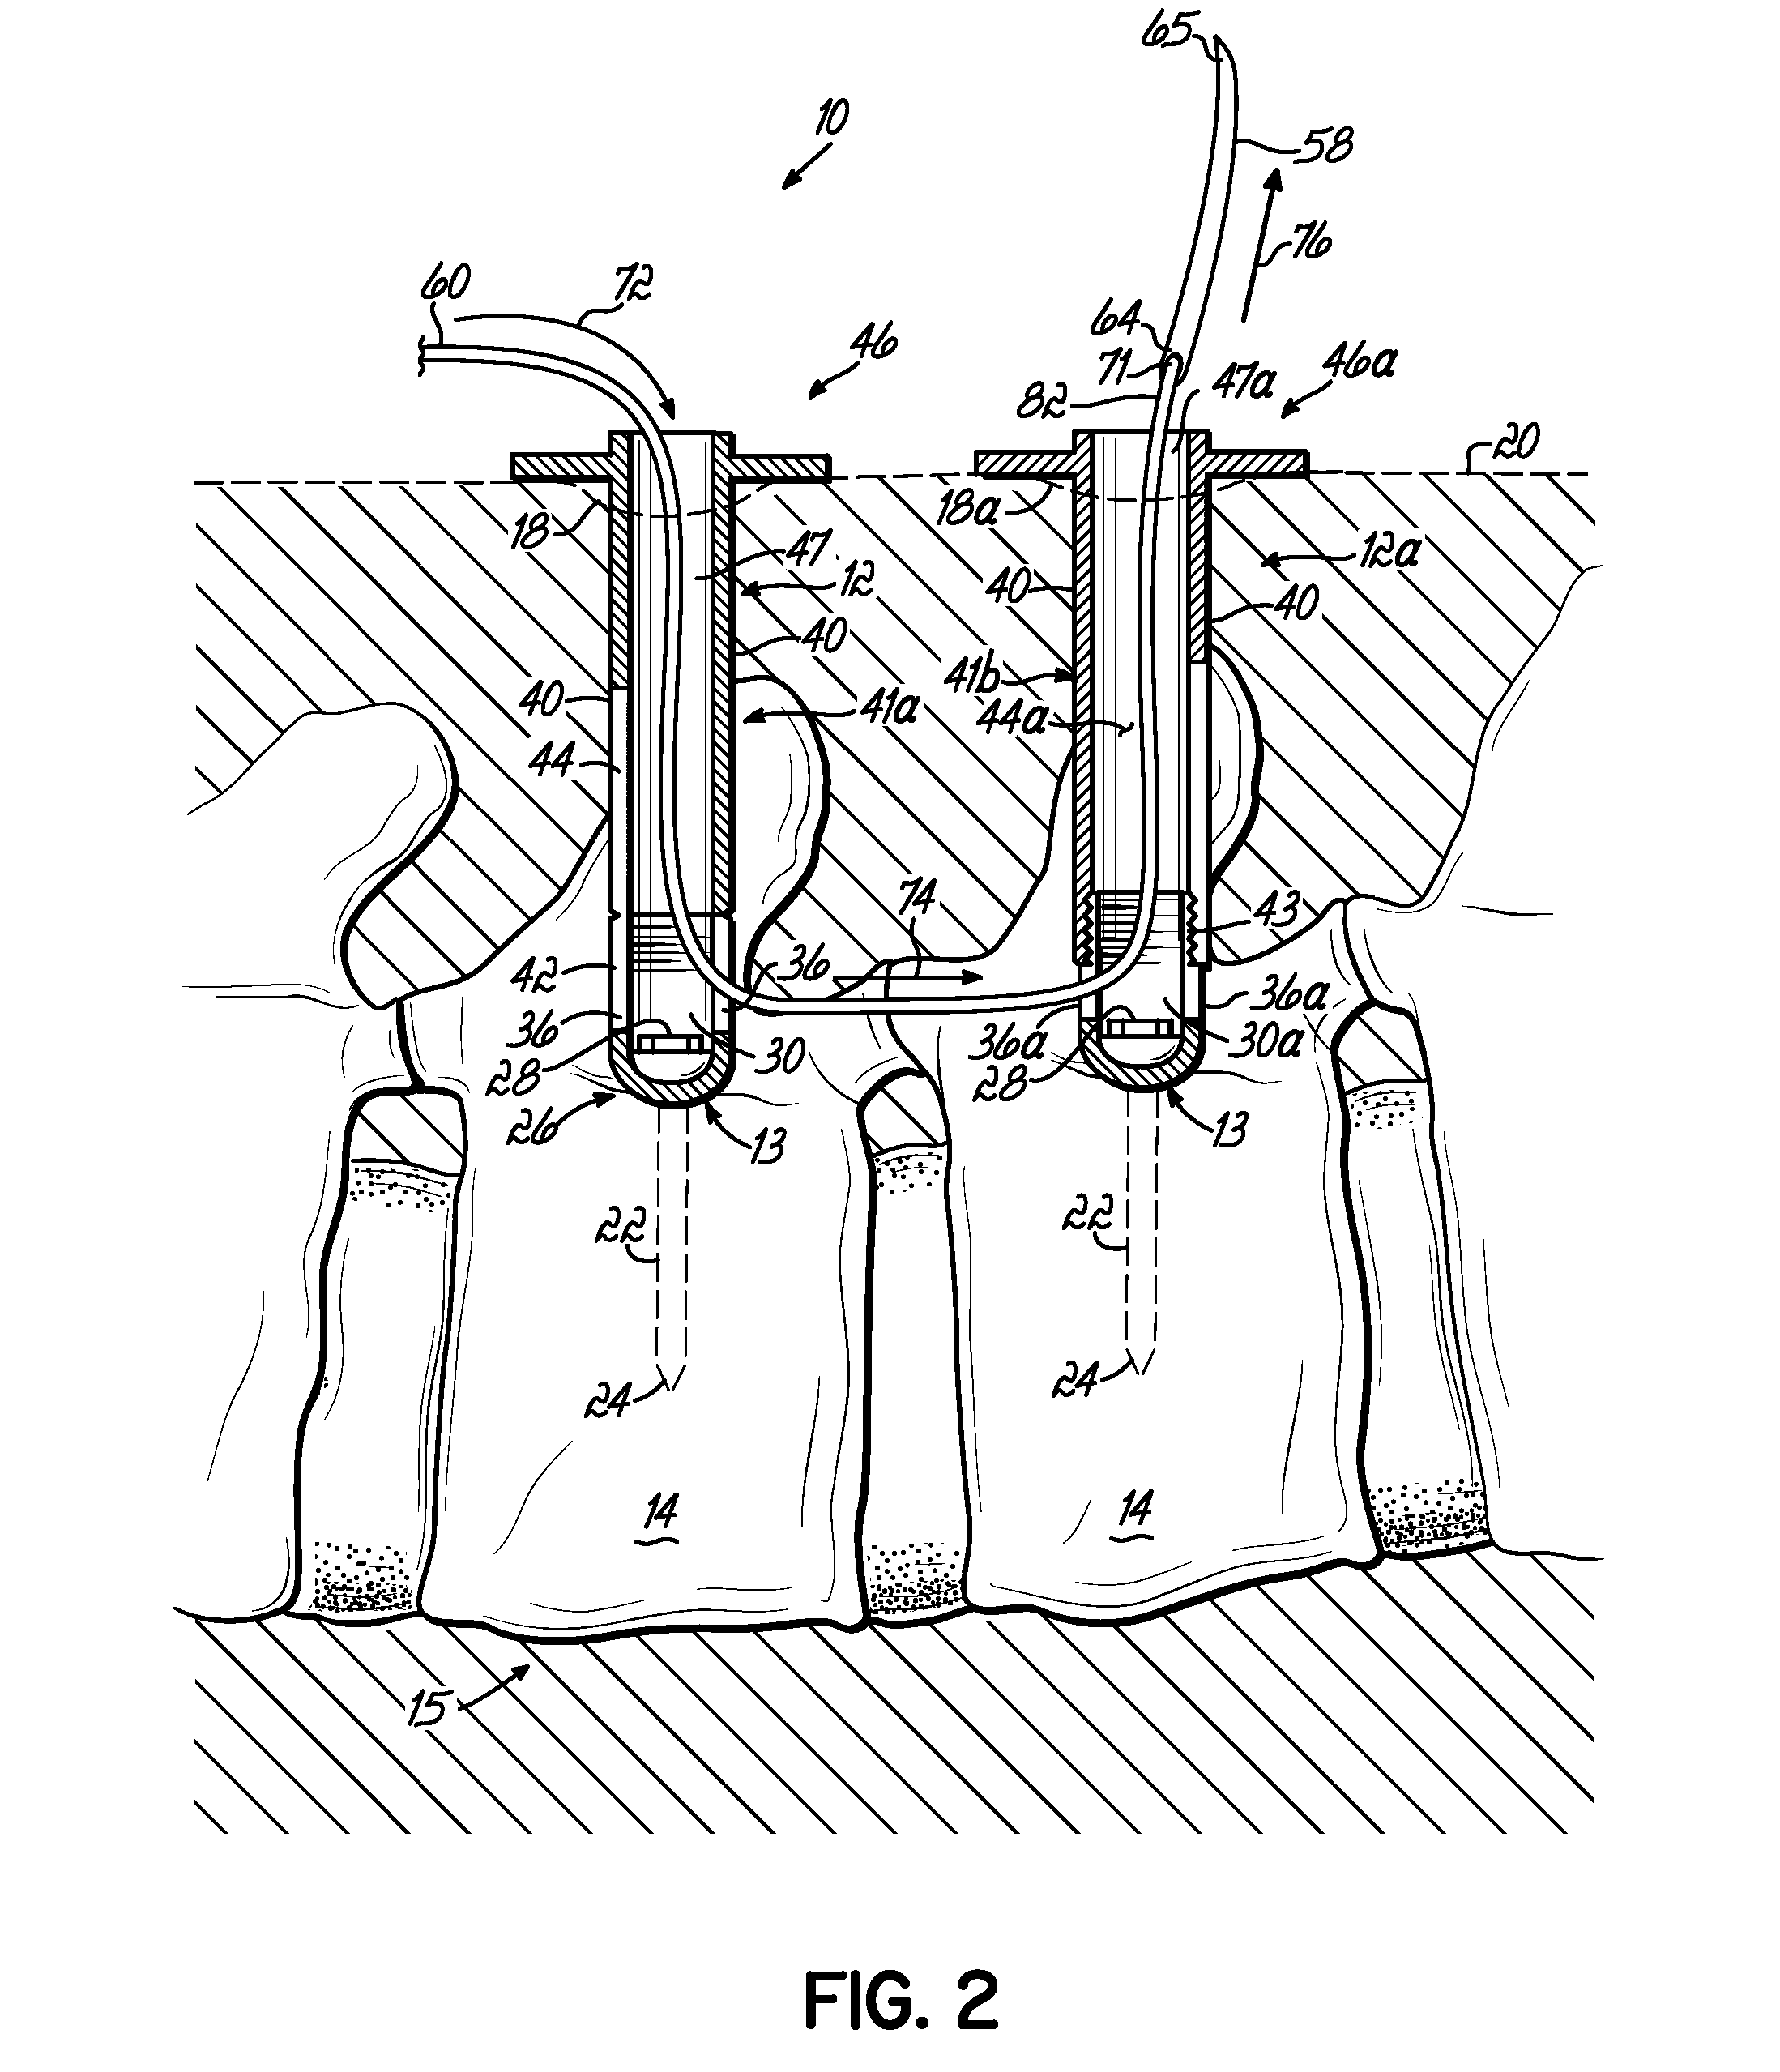 Instrumentation and associated techniques for minimally invasive spinal construct installation